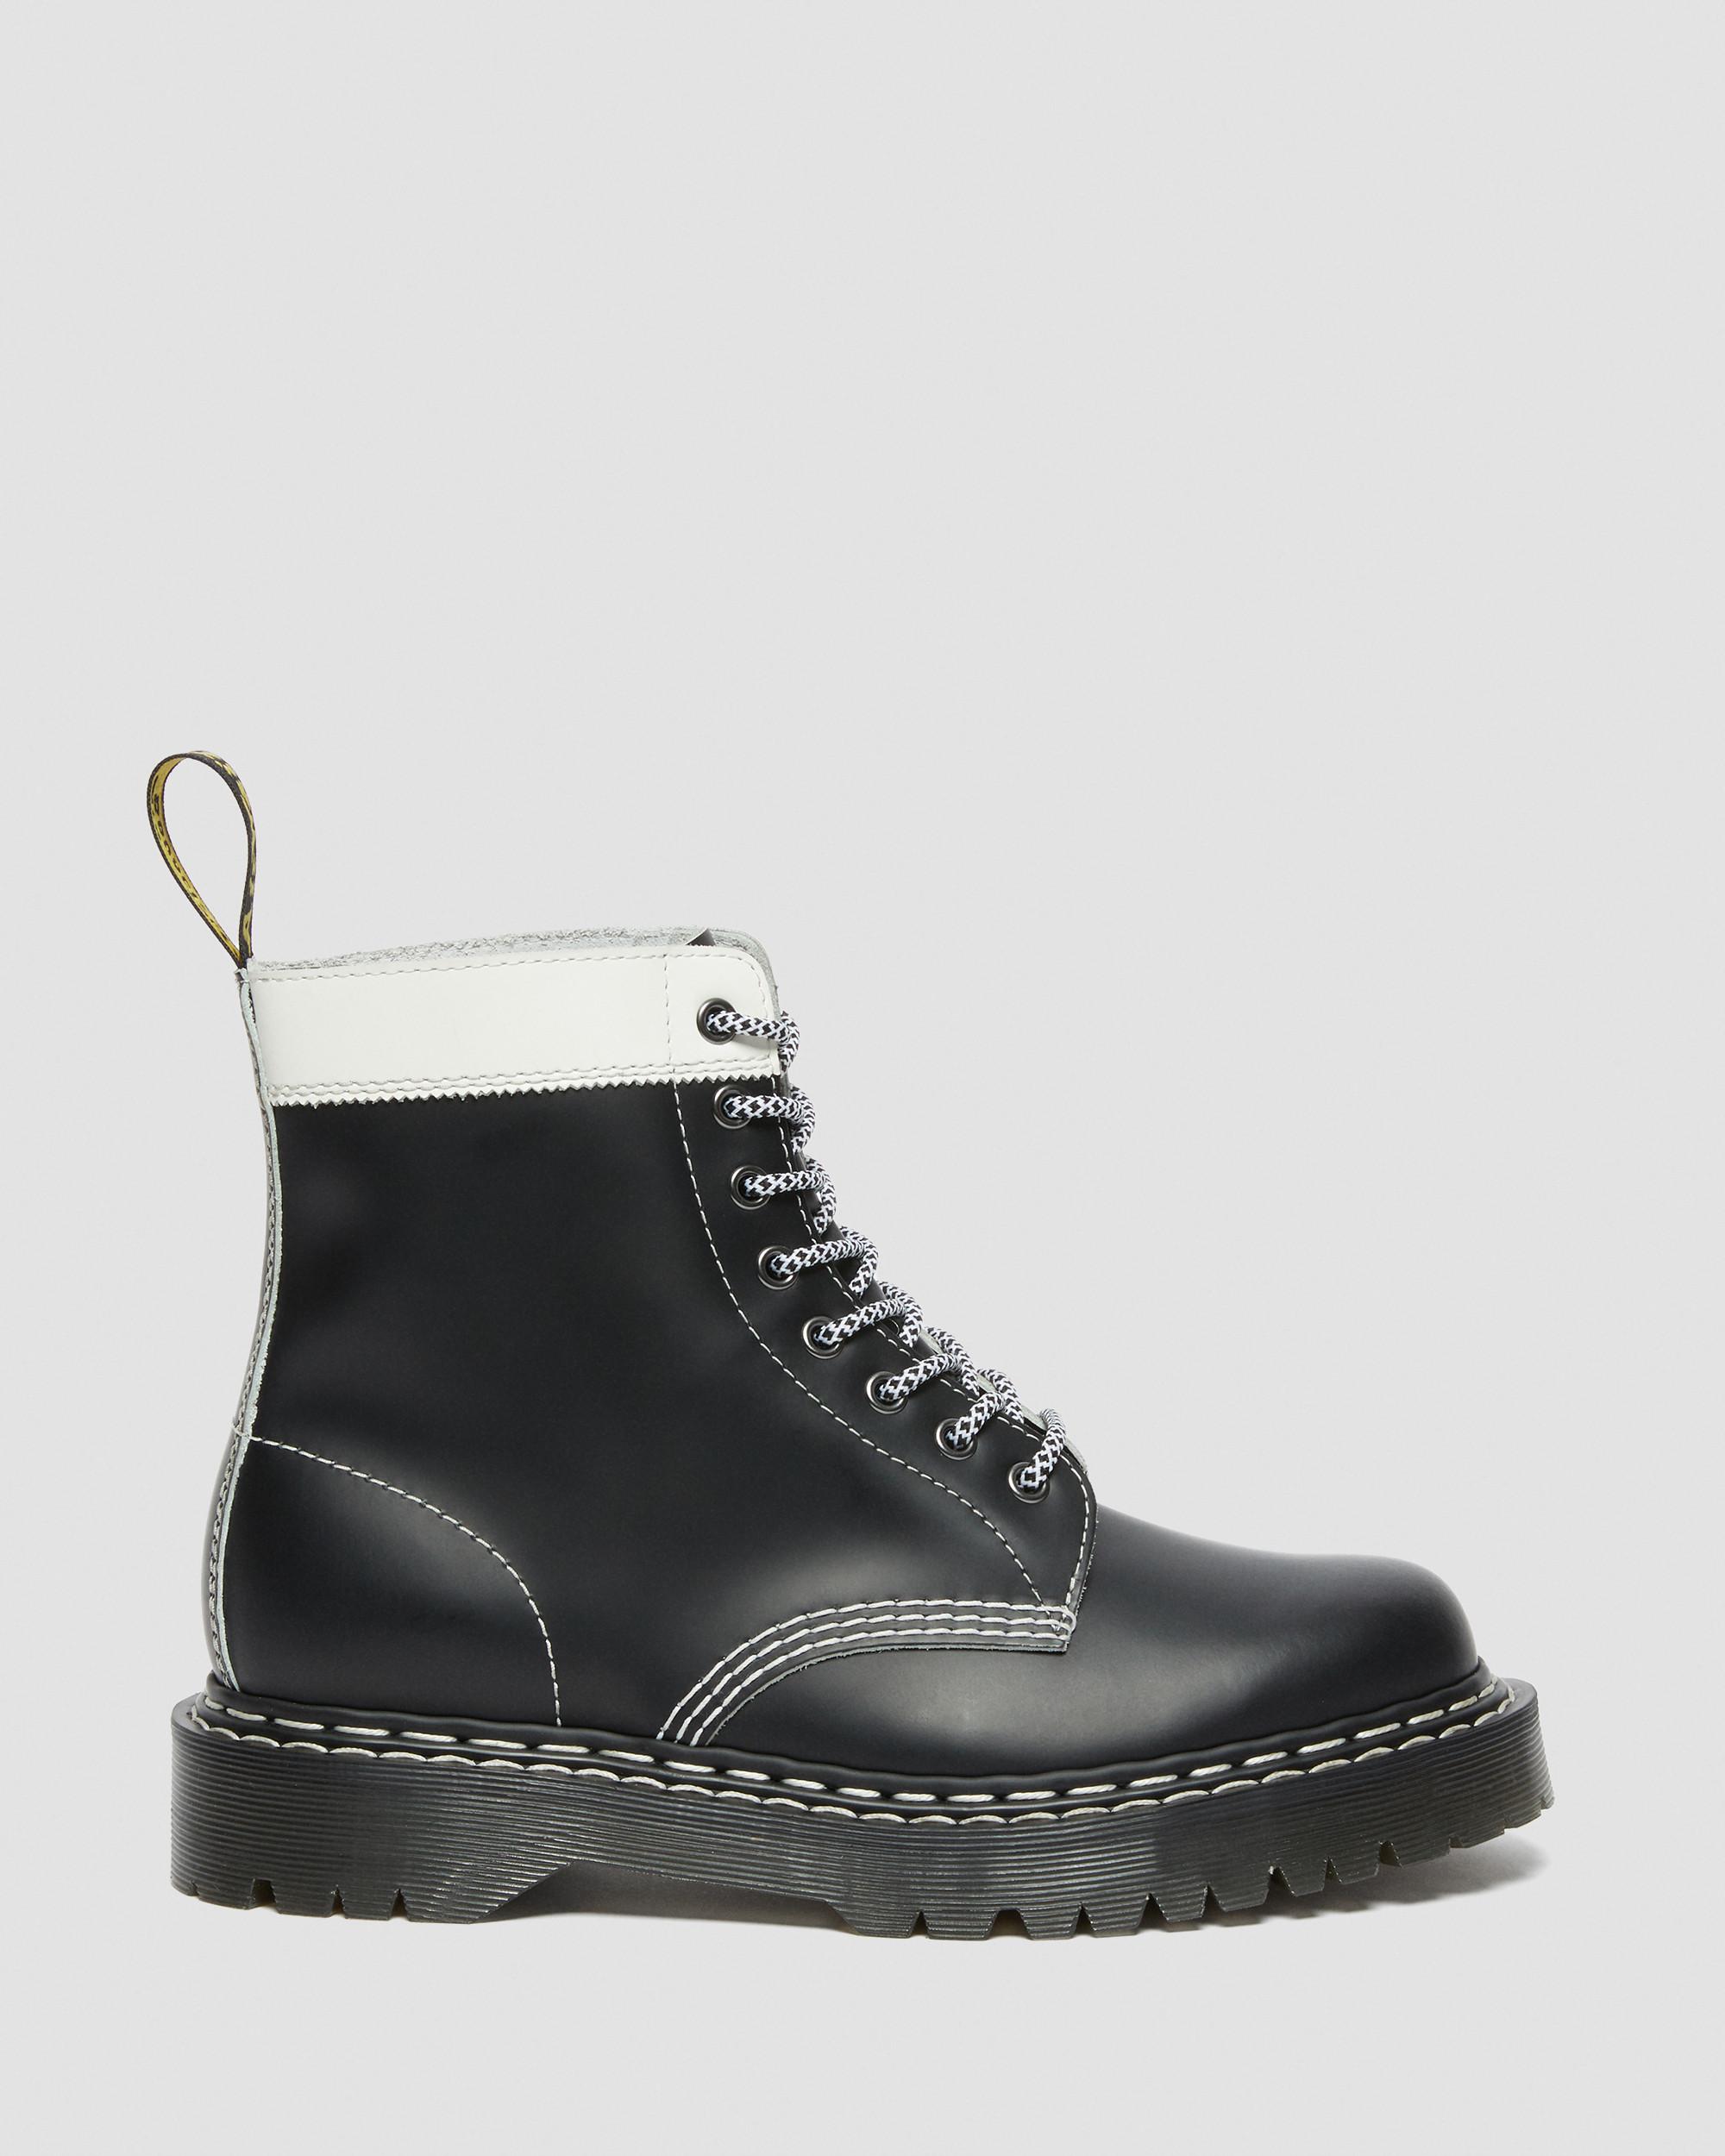 1460 Pascal Bex Leather Contrast Lace Up Boots | Dr. Martens